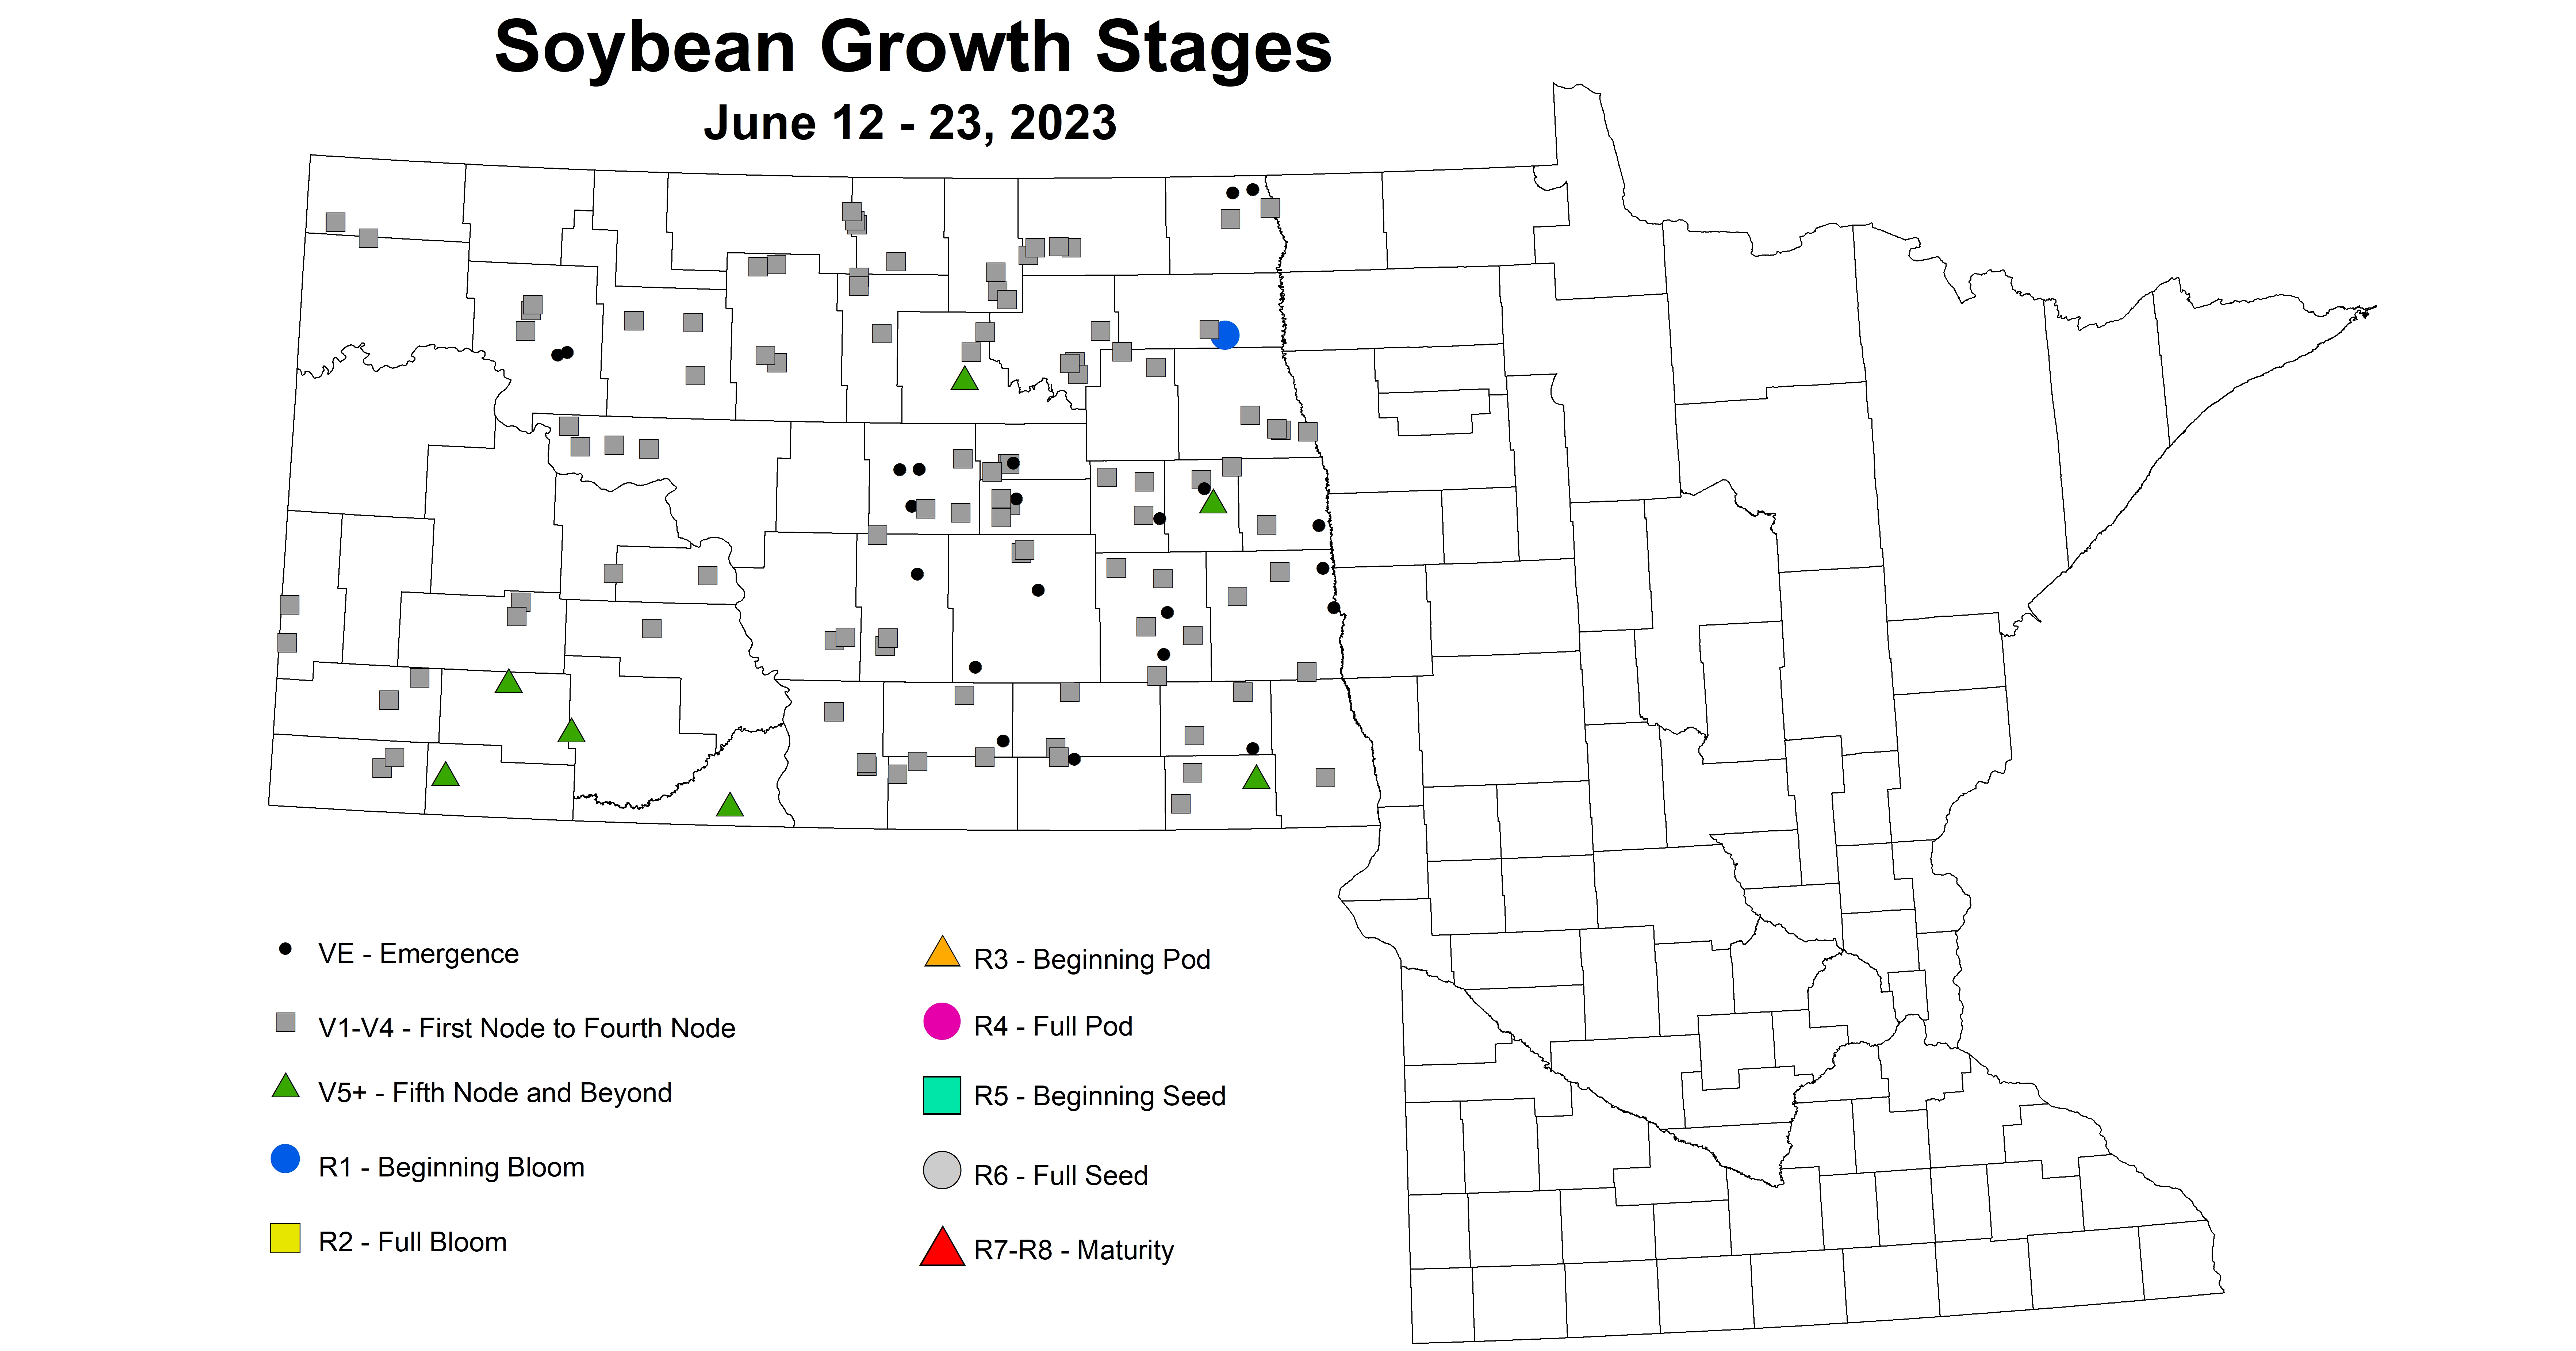 soybean growth stages June 12-23 2023 updated